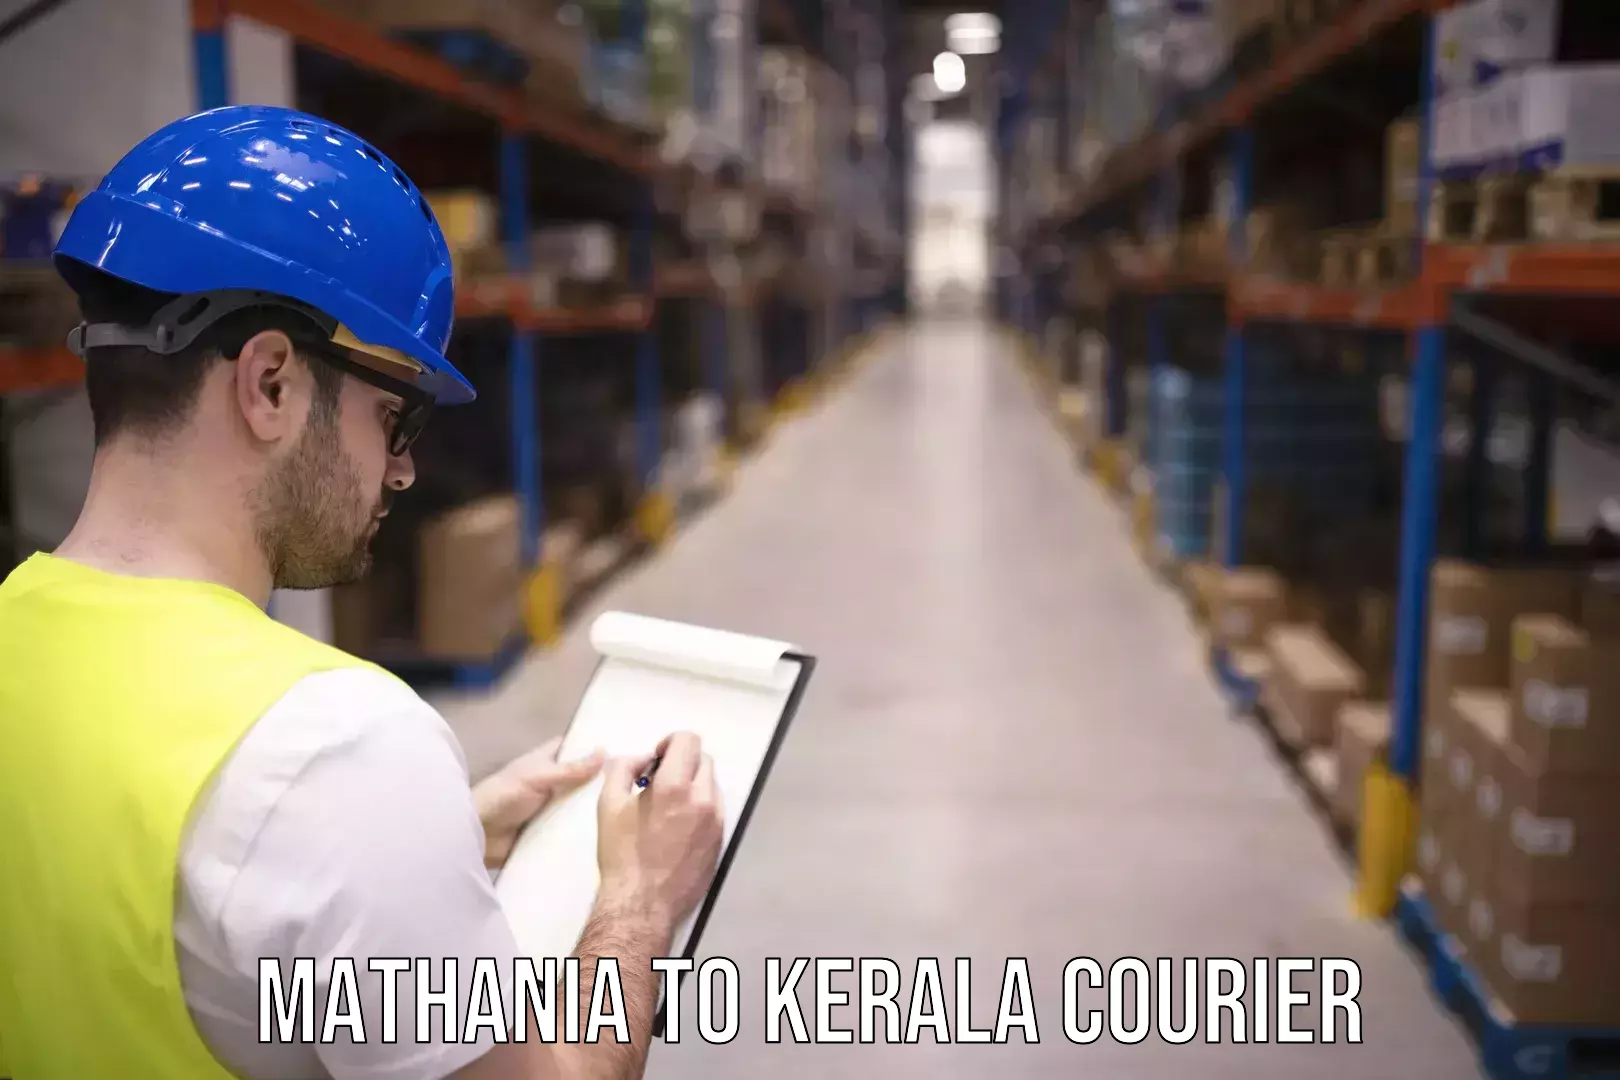 International courier networks Mathania to Chervathur